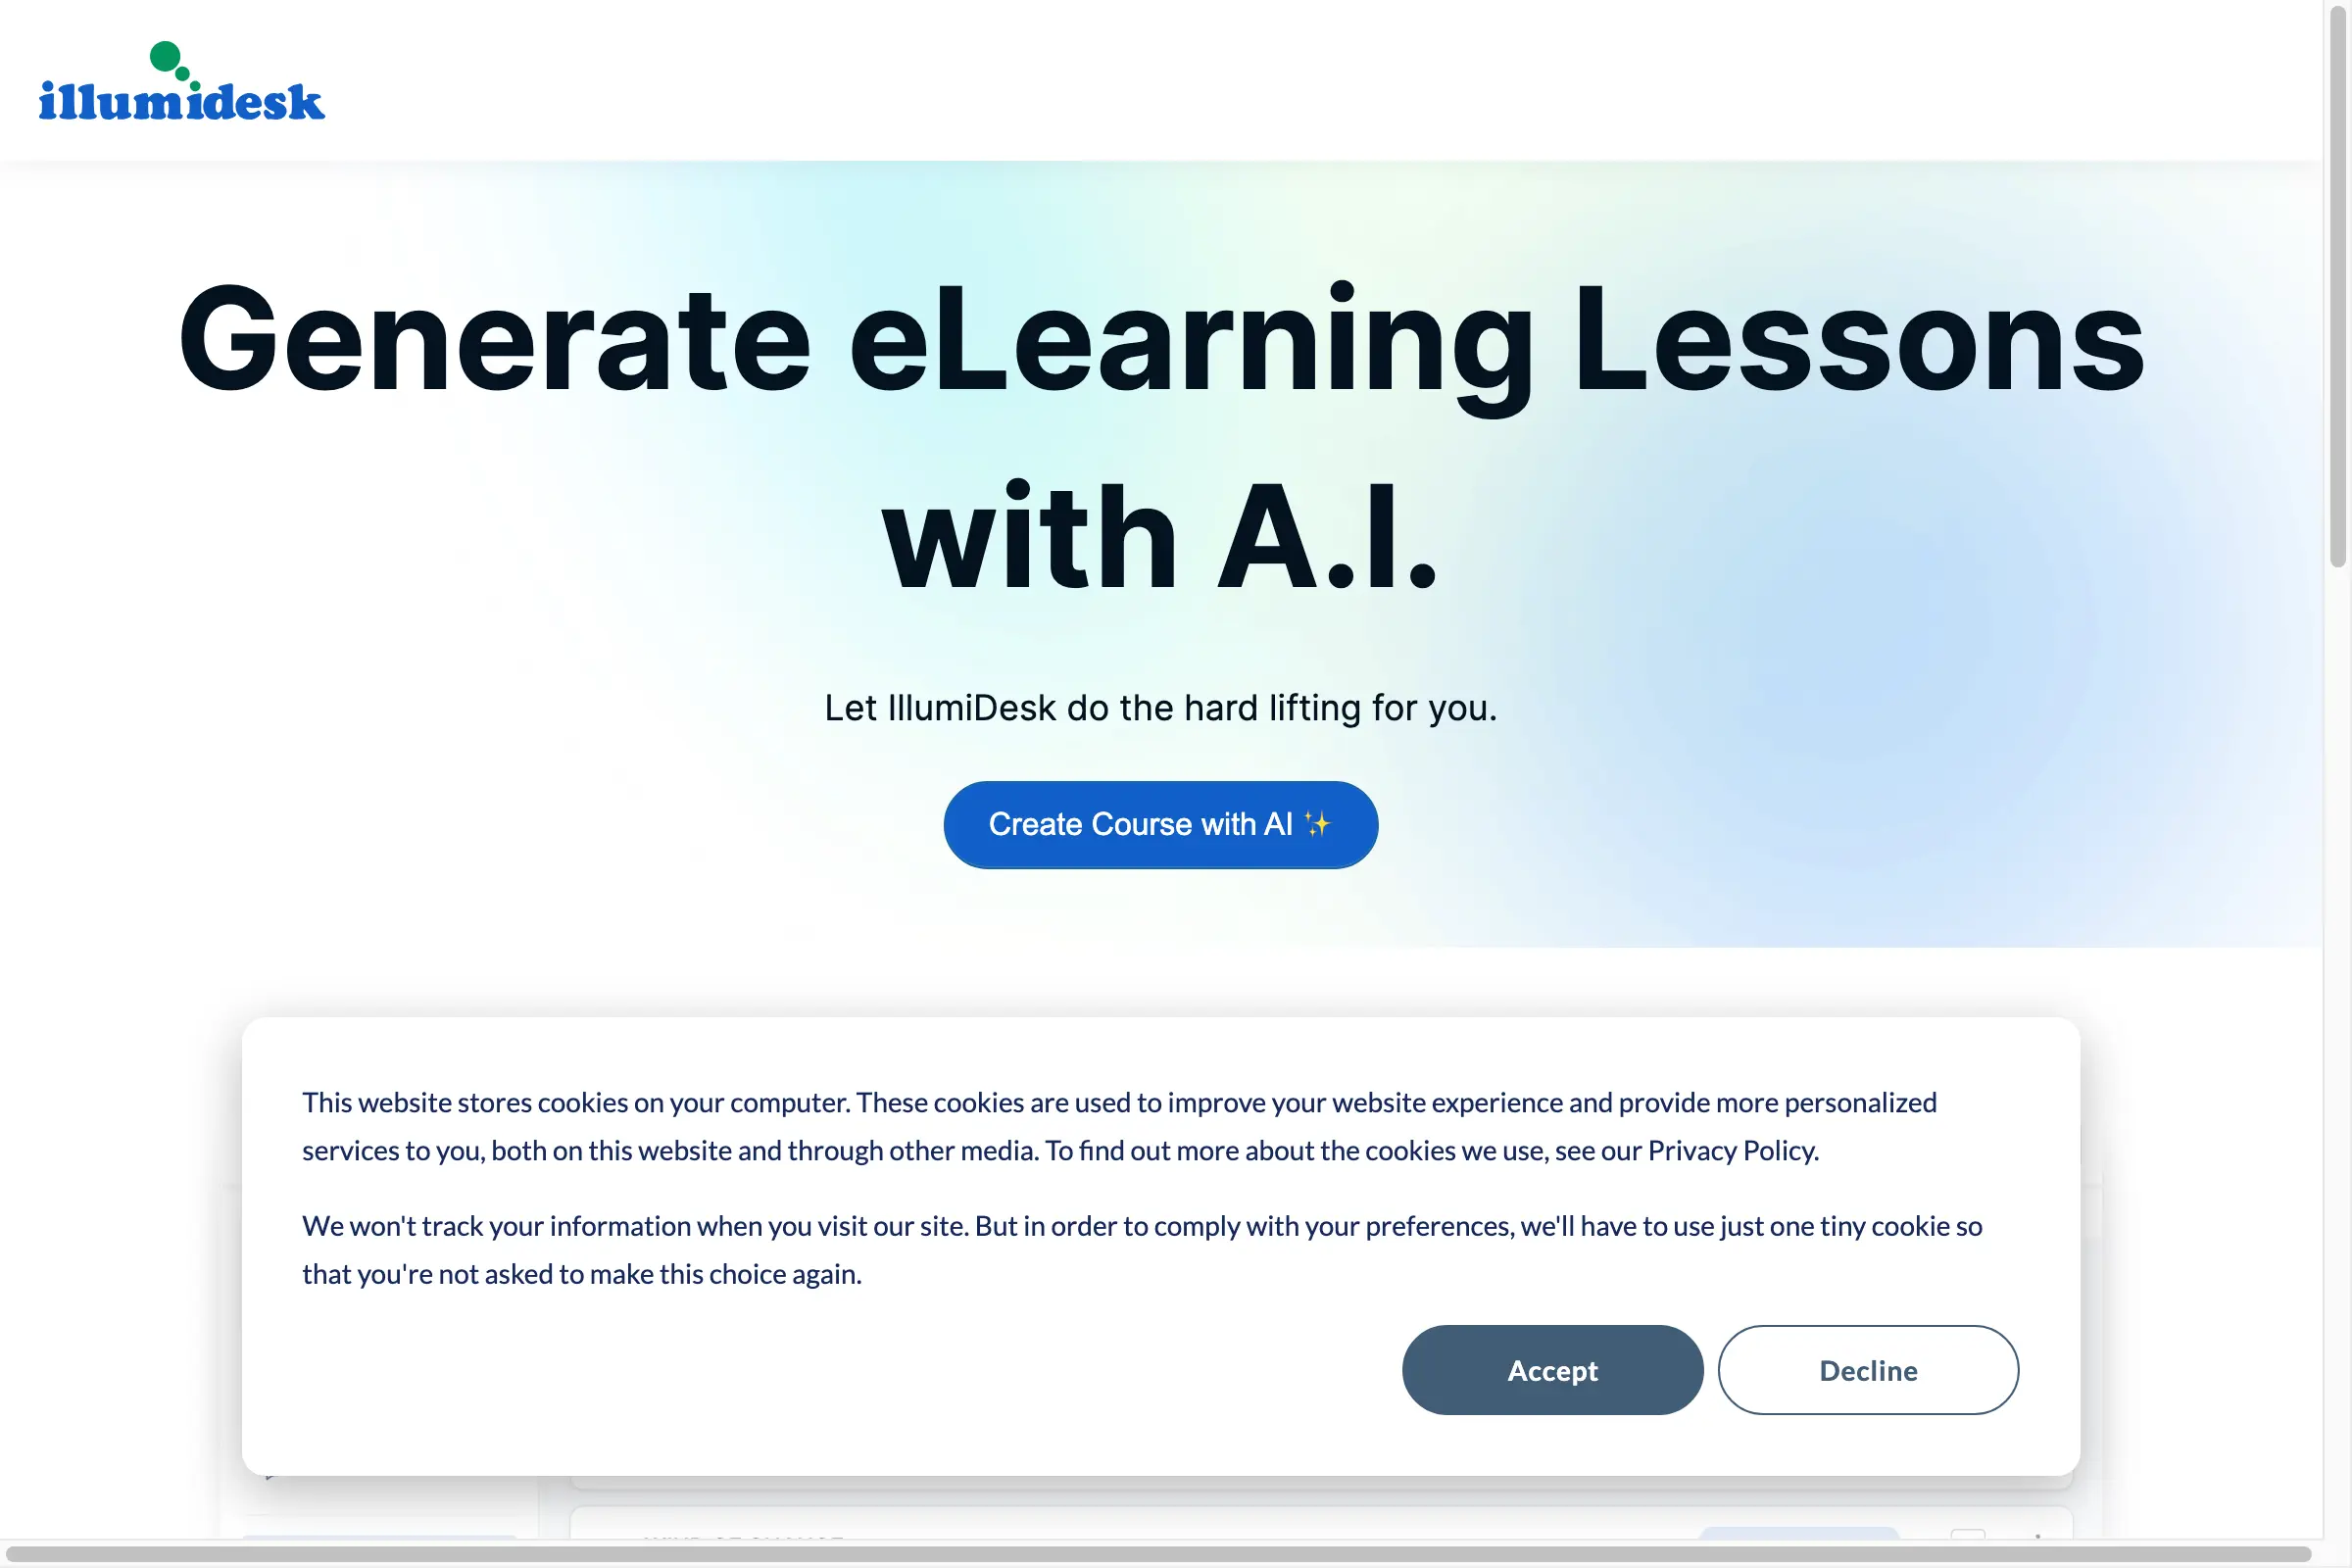 Course with AI